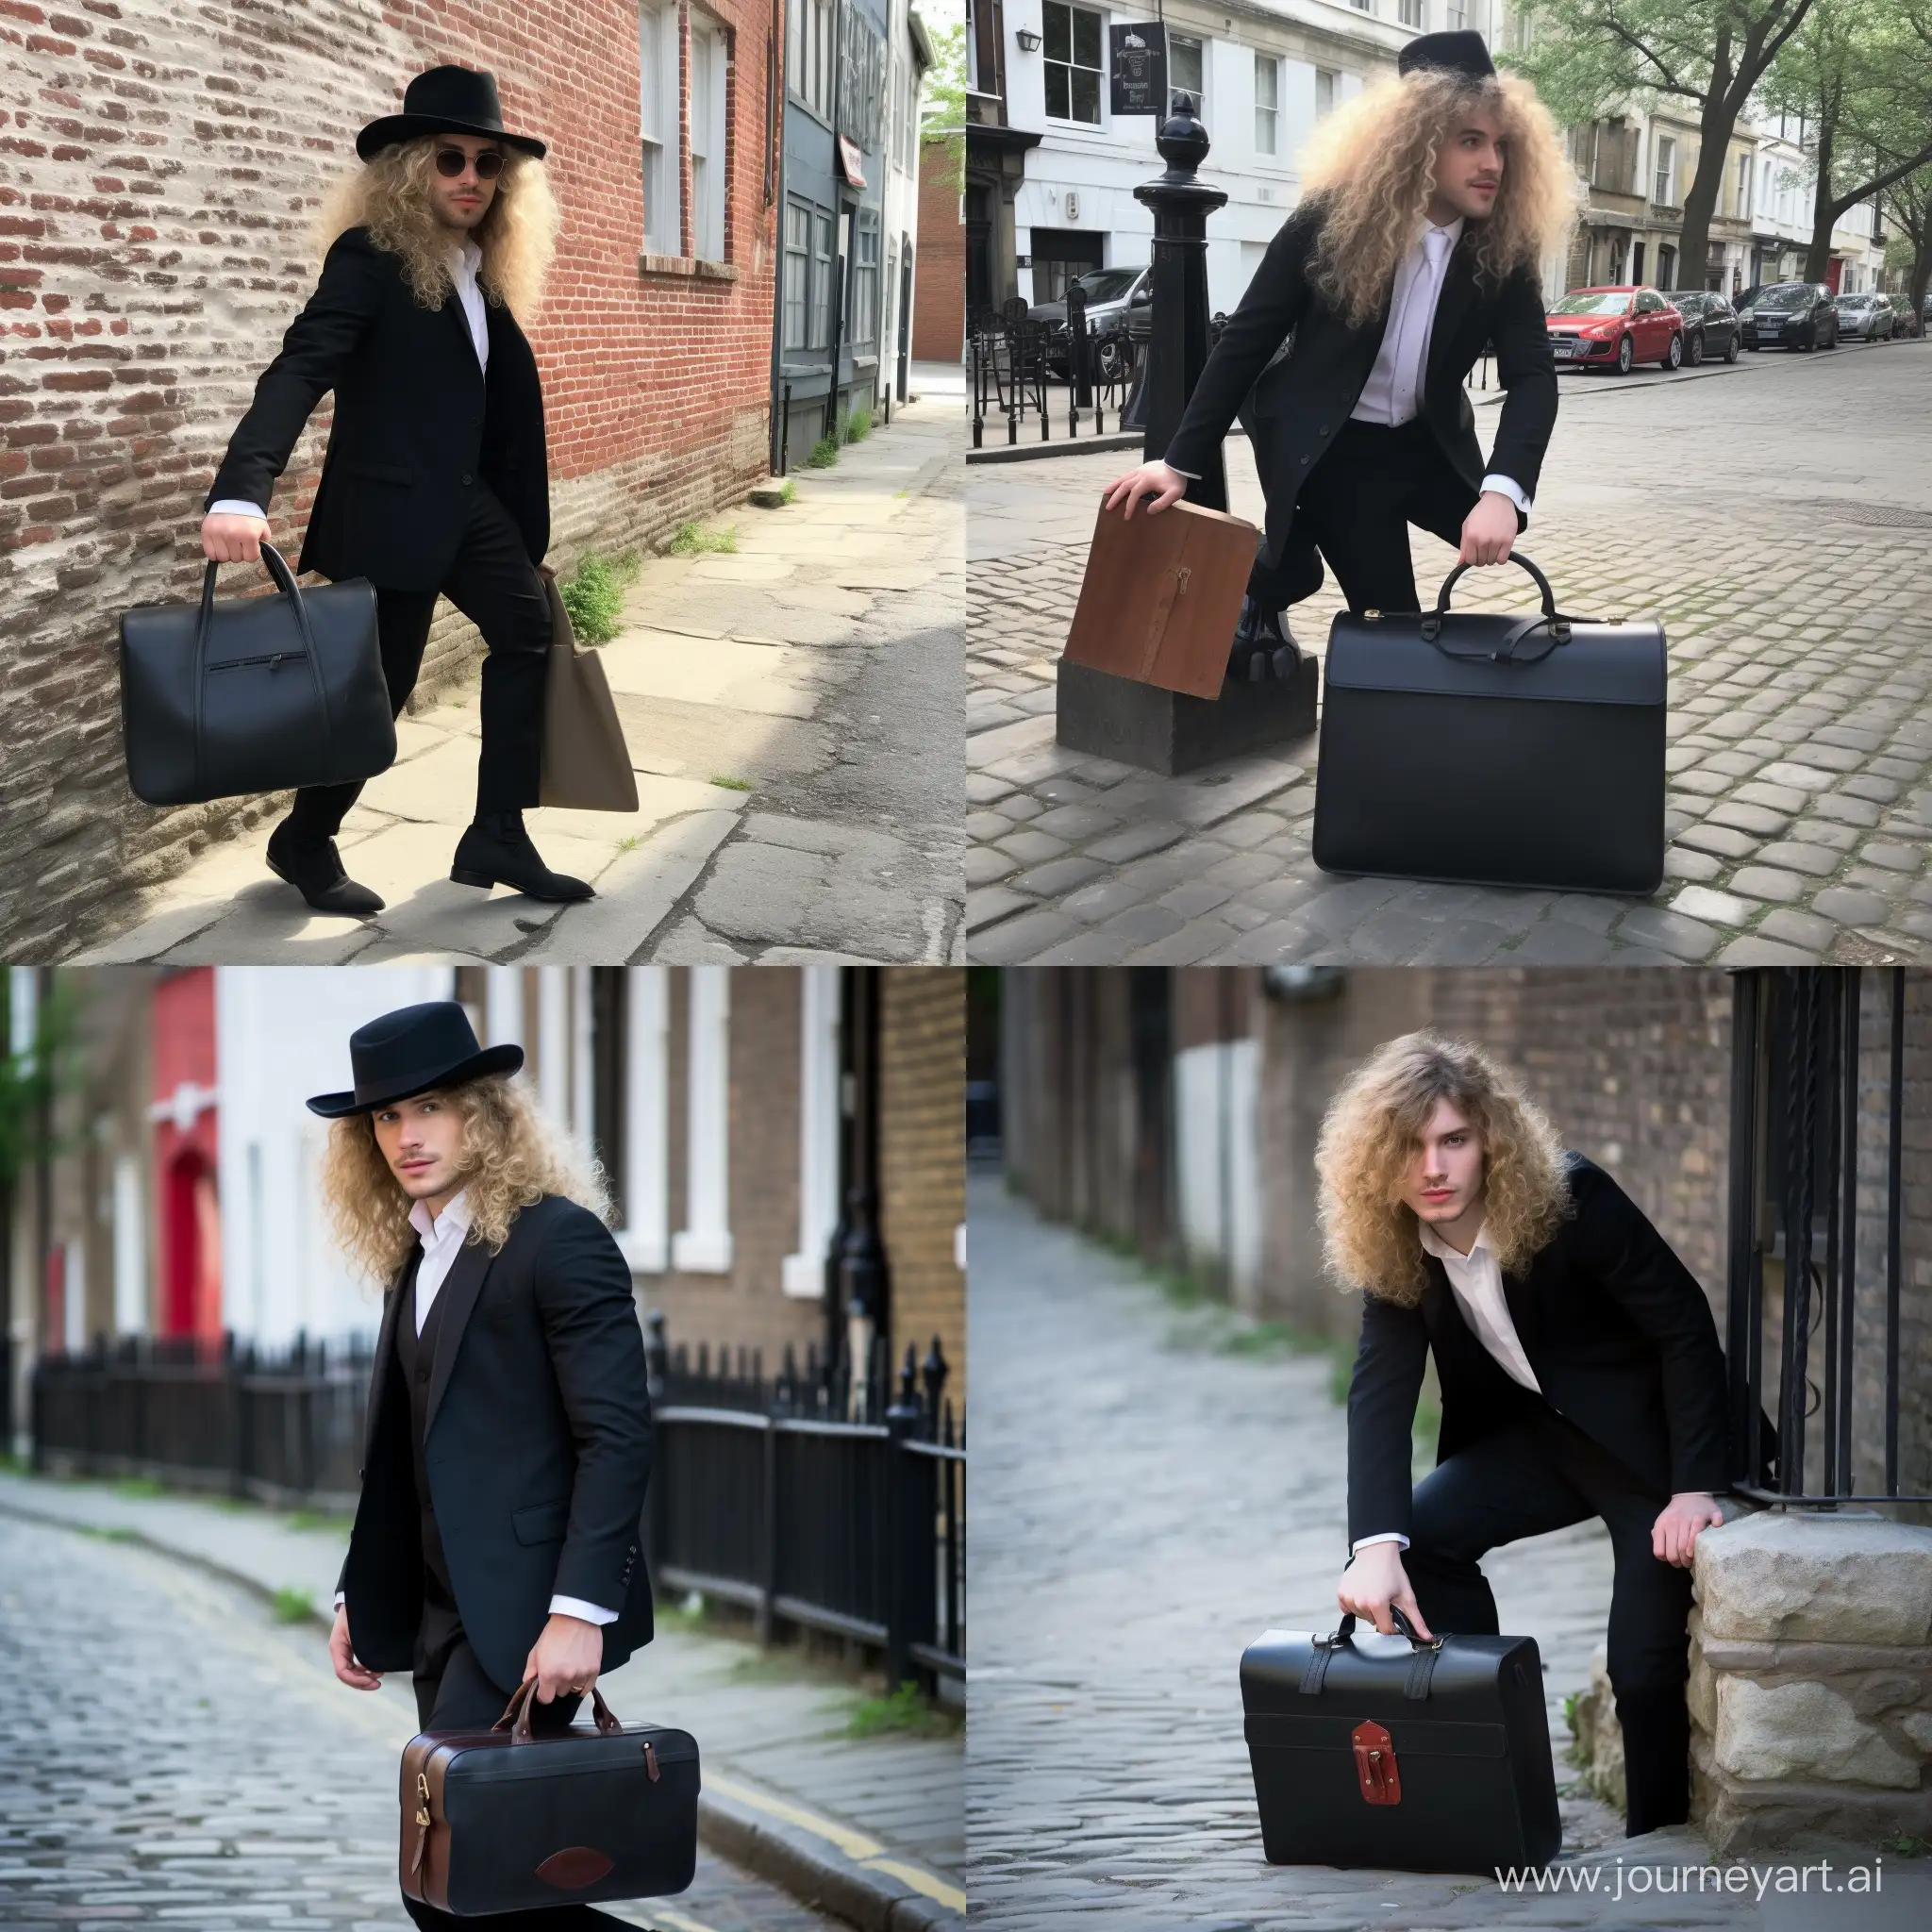 an effeminate man with long curly blonde hair going down his back, blue eyes, and pale skin, wearing a black and grey dress and bowler hat with a white undershirt and red bowtie, carrying one giant, old timey black gladstone bag with golden hinges, carrying the bag with both hands on the holding strap, walking down a cobbled street.